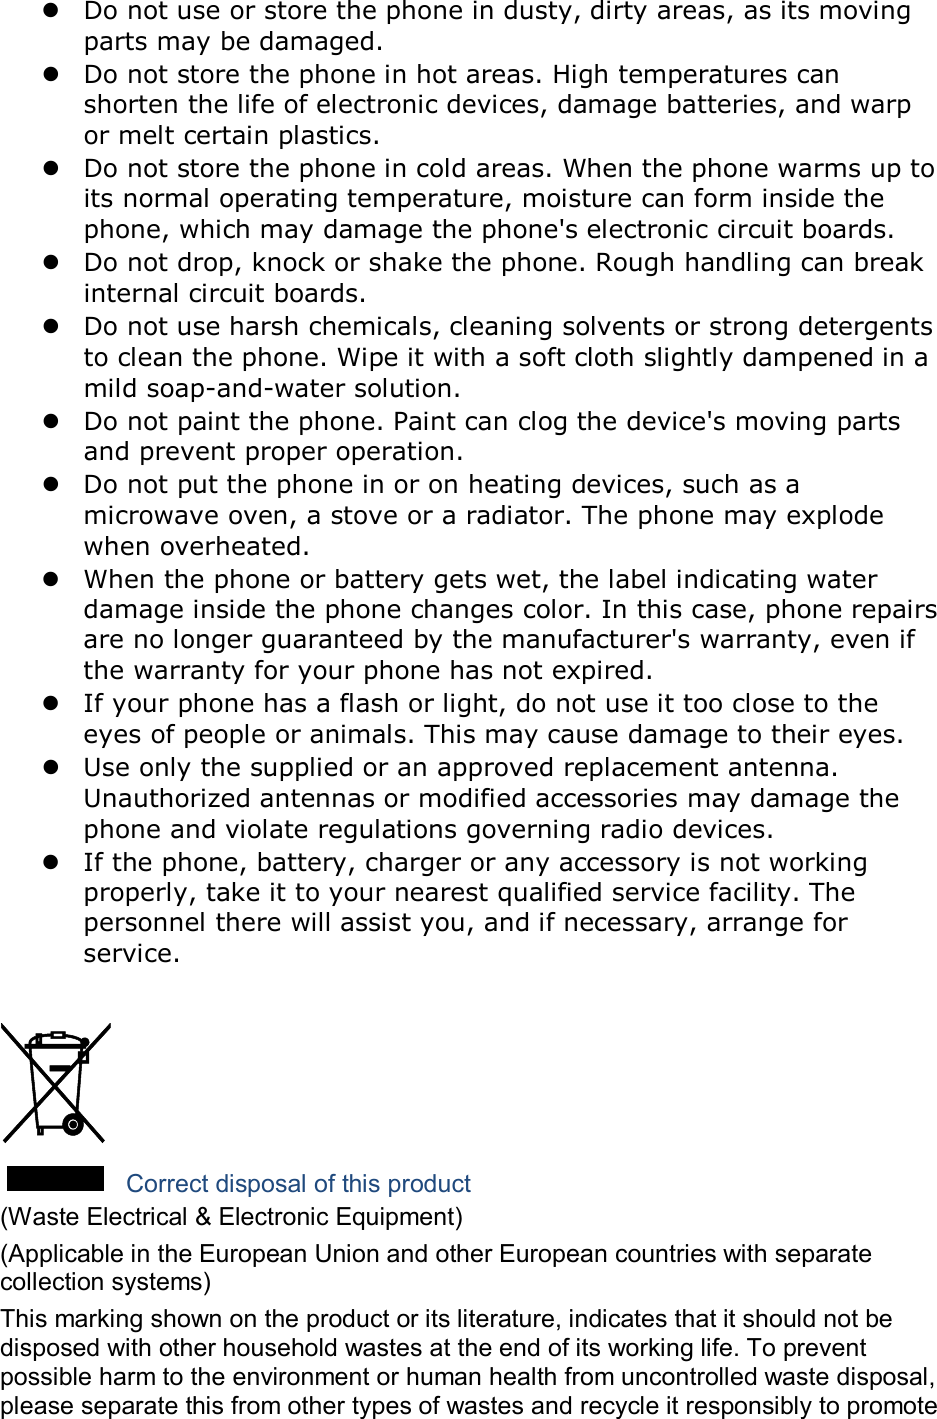  Do not use or store the phone in dusty, dirty areas, as its moving parts may be damaged.  Do not store the phone in hot areas. High temperatures can shorten the life of electronic devices, damage batteries, and warp or melt certain plastics.  Do not store the phone in cold areas. When the phone warms up to its normal operating temperature, moisture can form inside the phone, which may damage the phone&apos;s electronic circuit boards.  Do not drop, knock or shake the phone. Rough handling can break internal circuit boards.  Do not use harsh chemicals, cleaning solvents or strong detergents to clean the phone. Wipe it with a soft cloth slightly dampened in a mild soap-and-water solution.  Do not paint the phone. Paint can clog the device&apos;s moving parts and prevent proper operation.  Do not put the phone in or on heating devices, such as a microwave oven, a stove or a radiator. The phone may explode when overheated.  When the phone or battery gets wet, the label indicating water damage inside the phone changes color. In this case, phone repairs are no longer guaranteed by the manufacturer&apos;s warranty, even if the warranty for your phone has not expired.   If your phone has a flash or light, do not use it too close to the eyes of people or animals. This may cause damage to their eyes.  Use only the supplied or an approved replacement antenna. Unauthorized antennas or modified accessories may damage the phone and violate regulations governing radio devices.  If the phone, battery, charger or any accessory is not working properly, take it to your nearest qualified service facility. The personnel there will assist you, and if necessary, arrange for service.   Correct disposal of this product (Waste Electrical &amp; Electronic Equipment) (Applicable in the European Union and other European countries with separate collection systems) This marking shown on the product or its literature, indicates that it should not be disposed with other household wastes at the end of its working life. To prevent possible harm to the environment or human health from uncontrolled waste disposal, please separate this from other types of wastes and recycle it responsibly to promote 